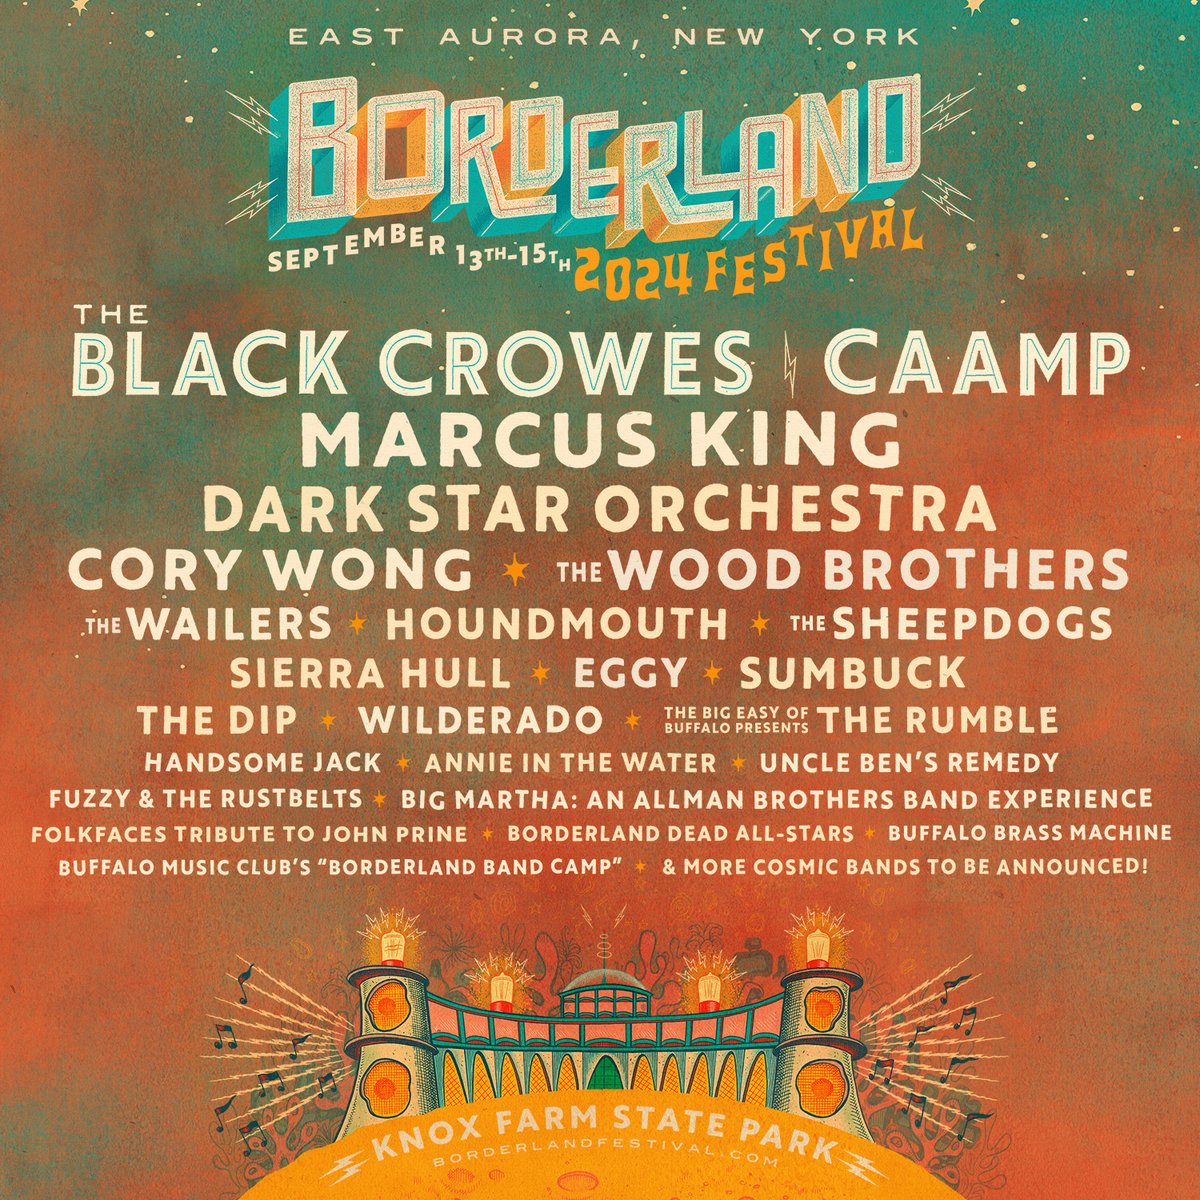 🎶 Exciting News! The Wailers are coming to @borderlandfestival ! 🌟 Join us in East Aurora, New York from September 13-15. Get ready for some Real Roots Rock Reggae! 🎟️ Ticket Sales Alert! 🎟️ Presale: Kick-off is this Friday, April 26th, at 10 AM ET. borderlandfestival.com